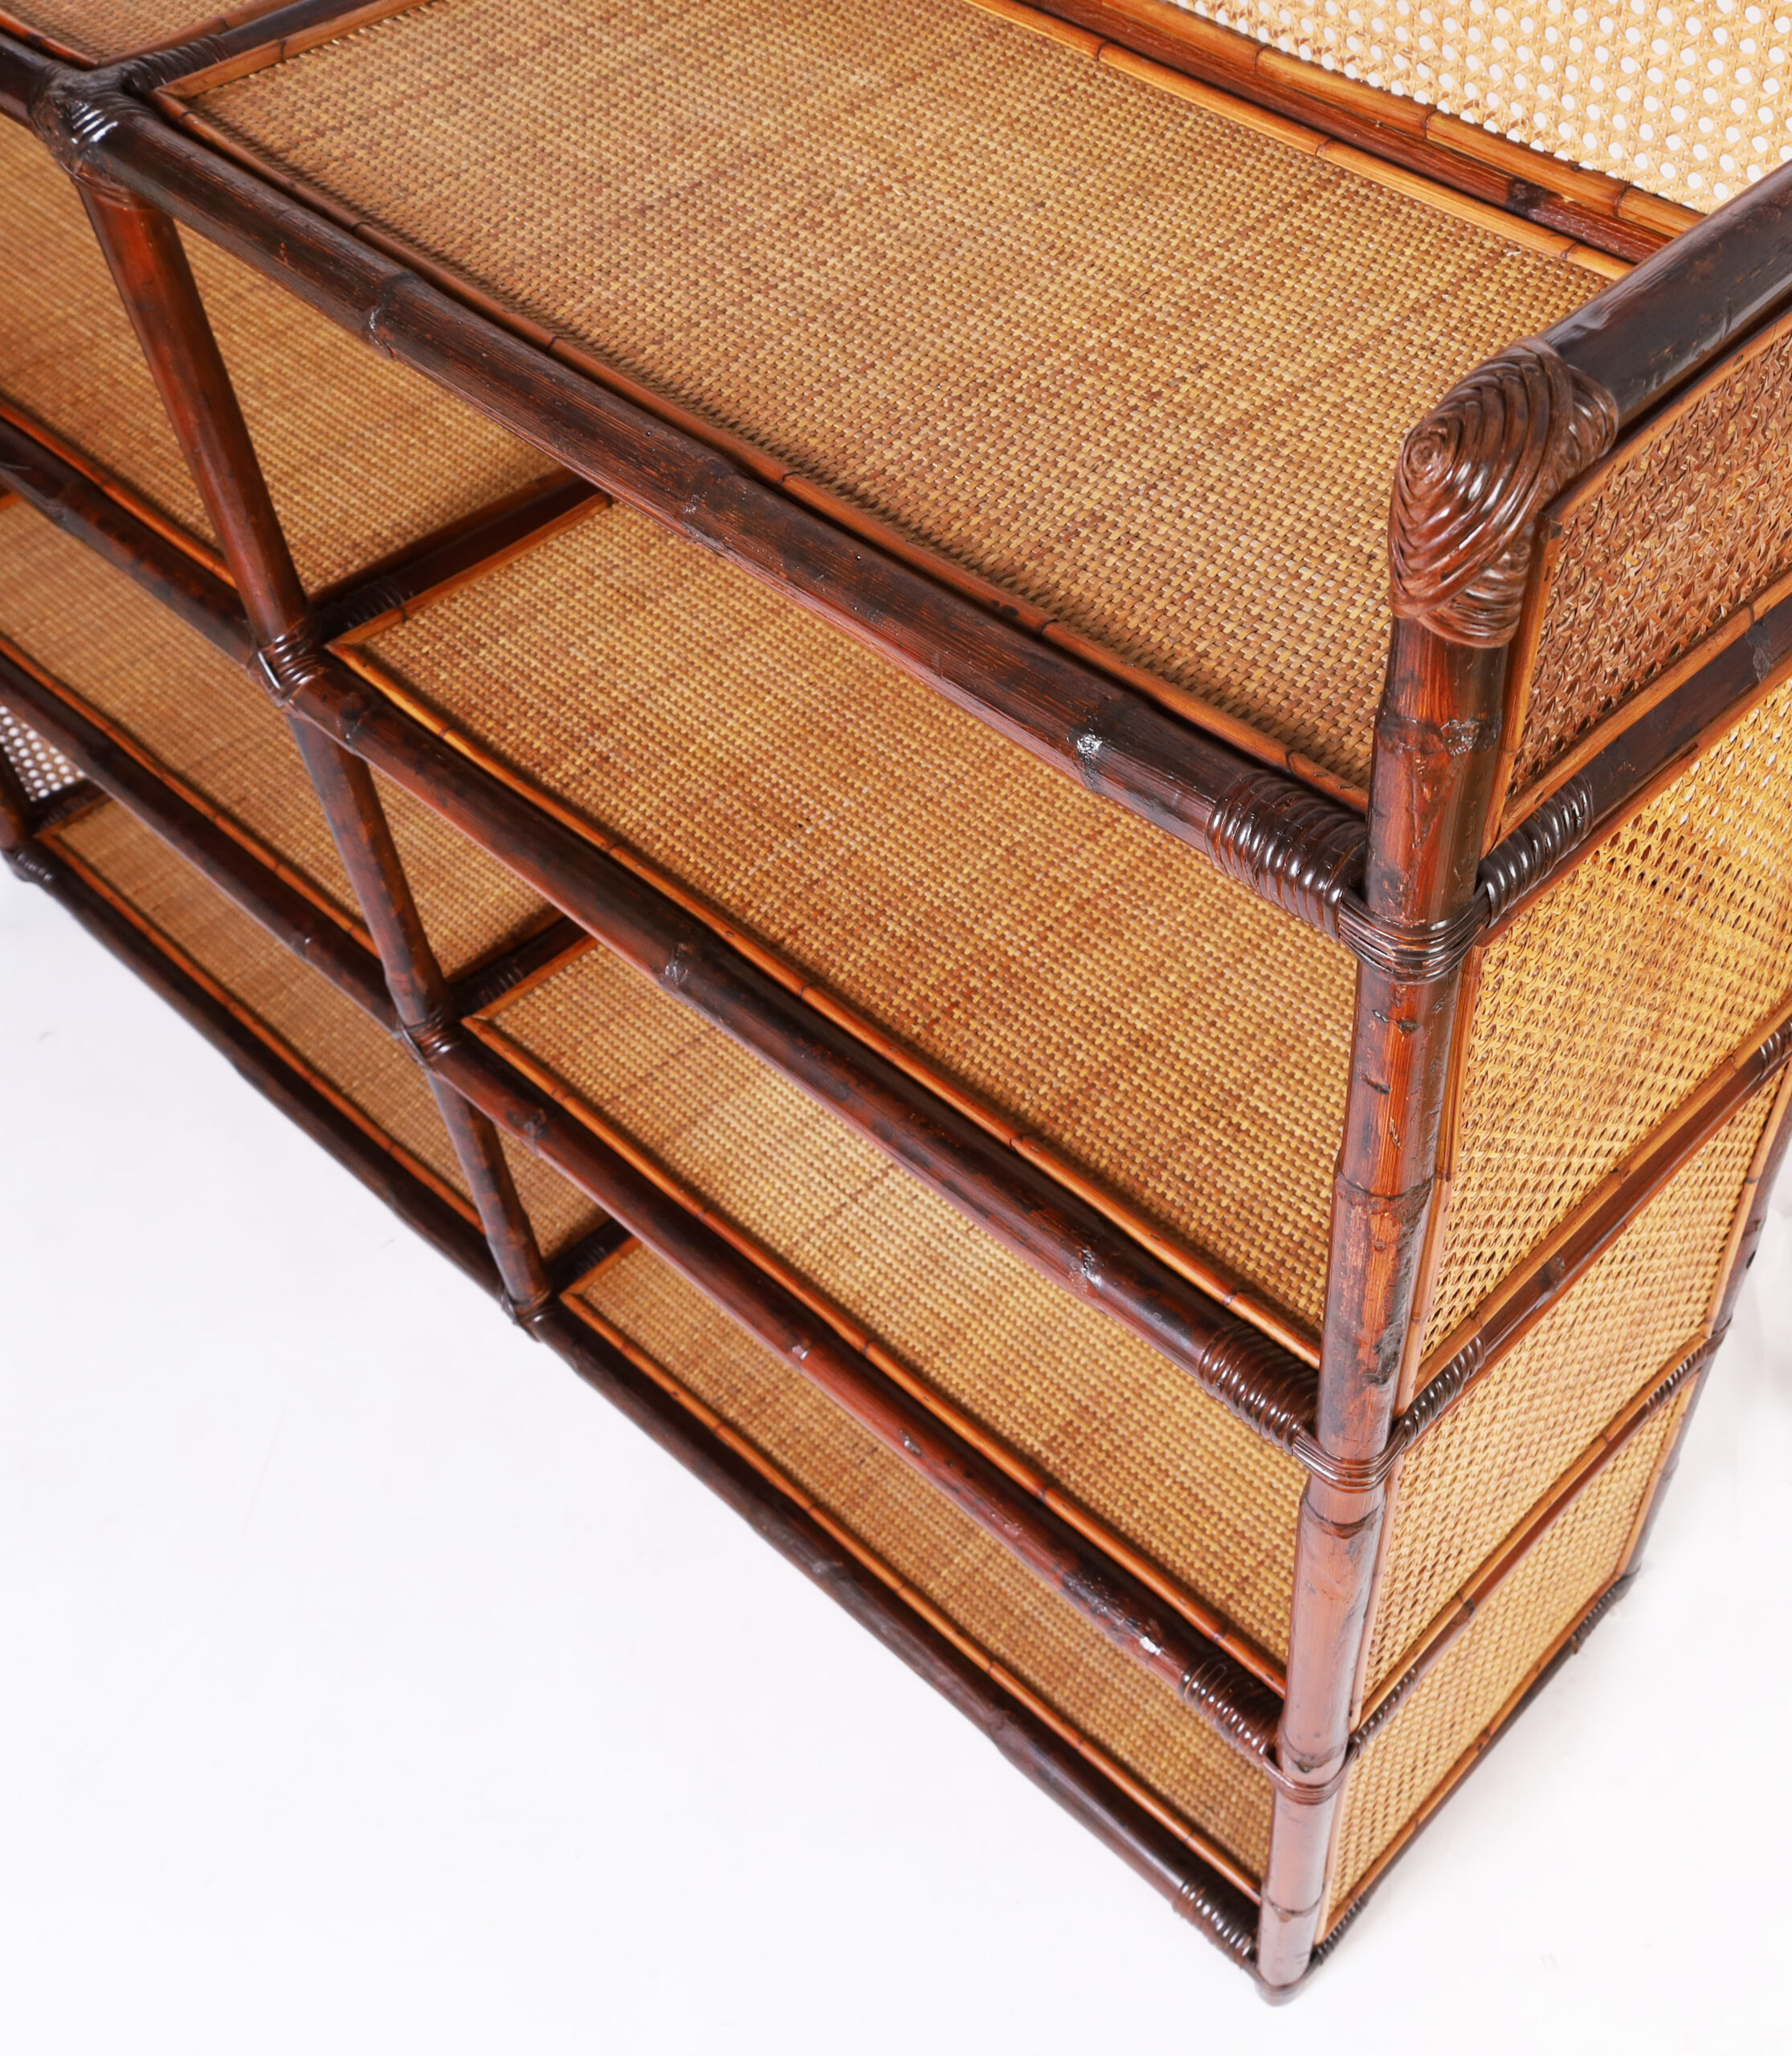 Vintage Caned Bamboo and Grasscloth Etagere or Bookshelf